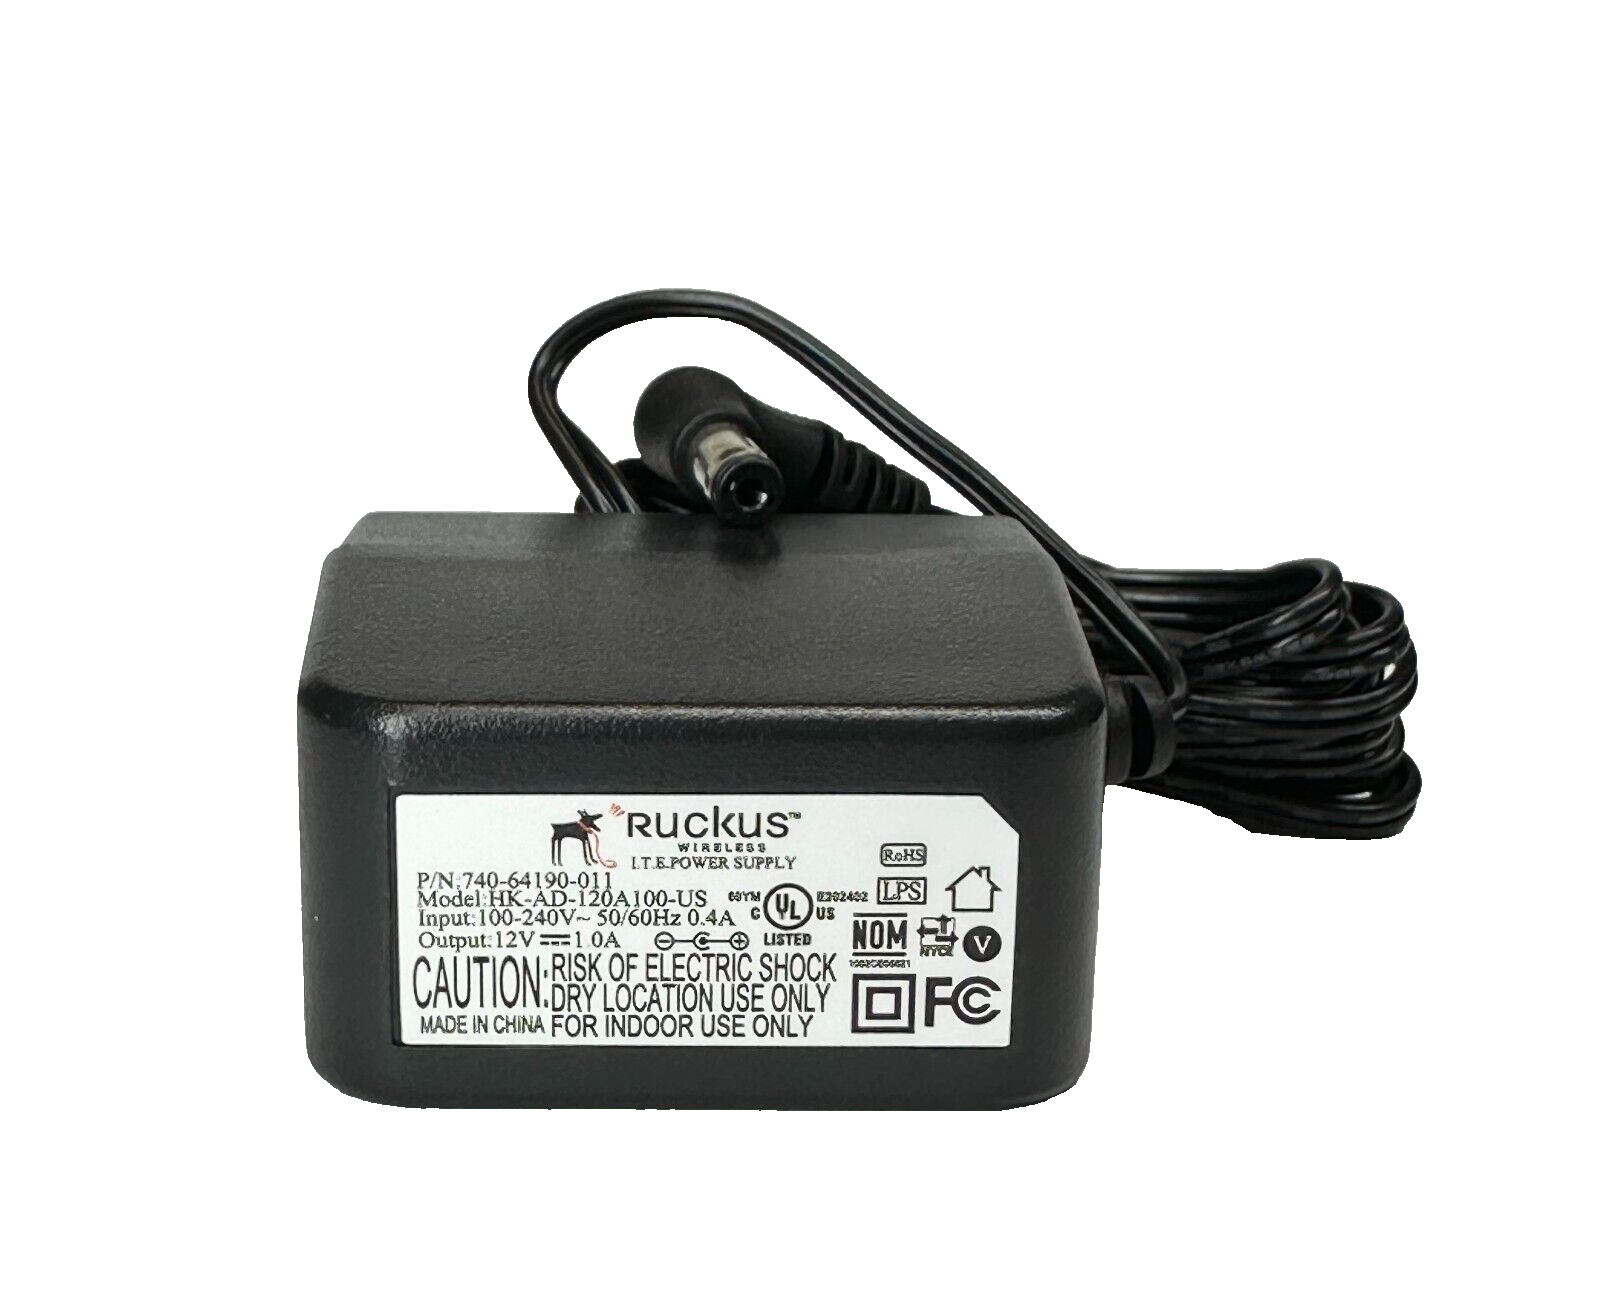 Ruckus Power Supply 12VDC 1.0A MPN 740-64190-001 Model HK-AD-120A100-US *NEW* Type AC/DC Adapter Features Powered MPN H